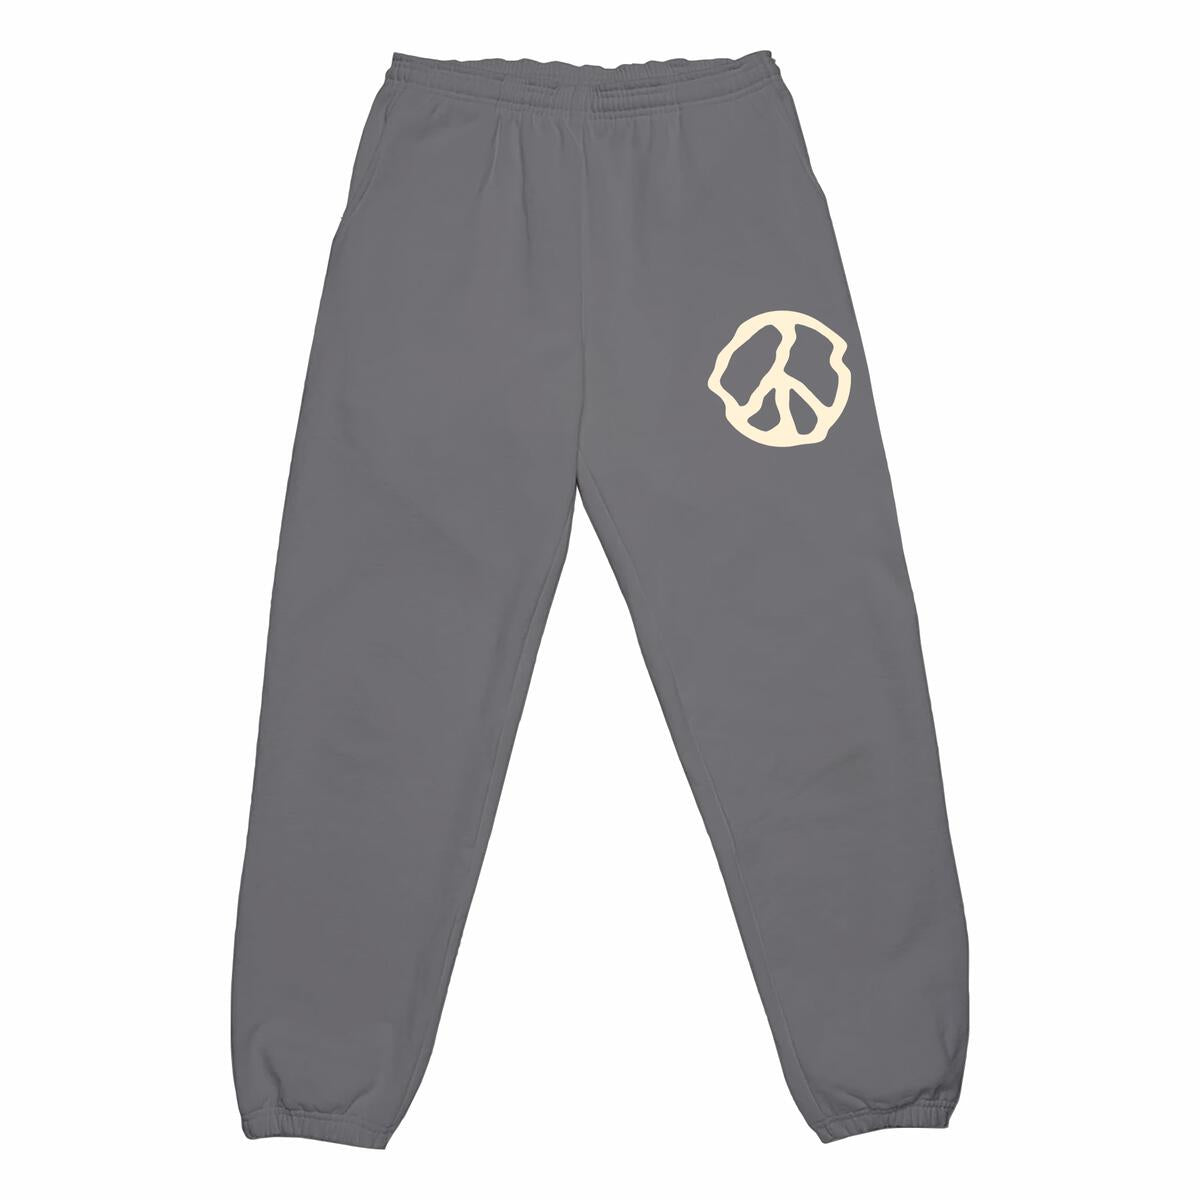 Tiny Whales Good Vibes Peace Sign Sweatpants - Twinkle Twinkle Little One